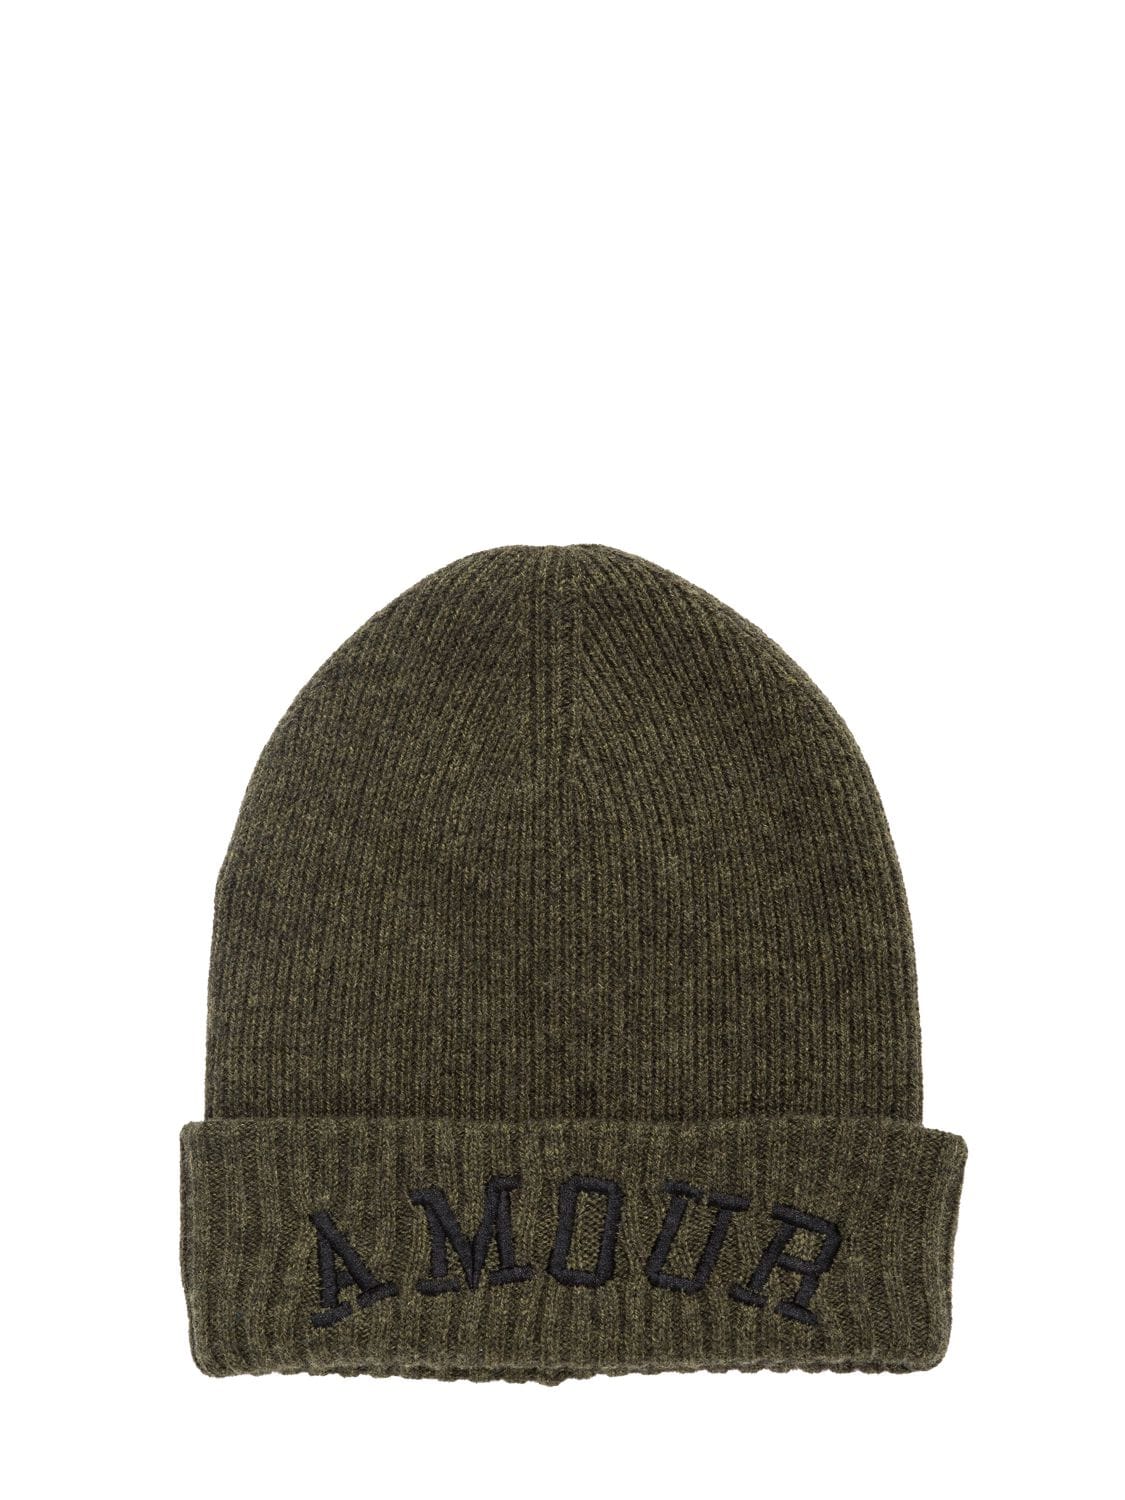 Zadig & Voltaire Kids' 刺绣羊毛混纺针织便帽 In Military Green